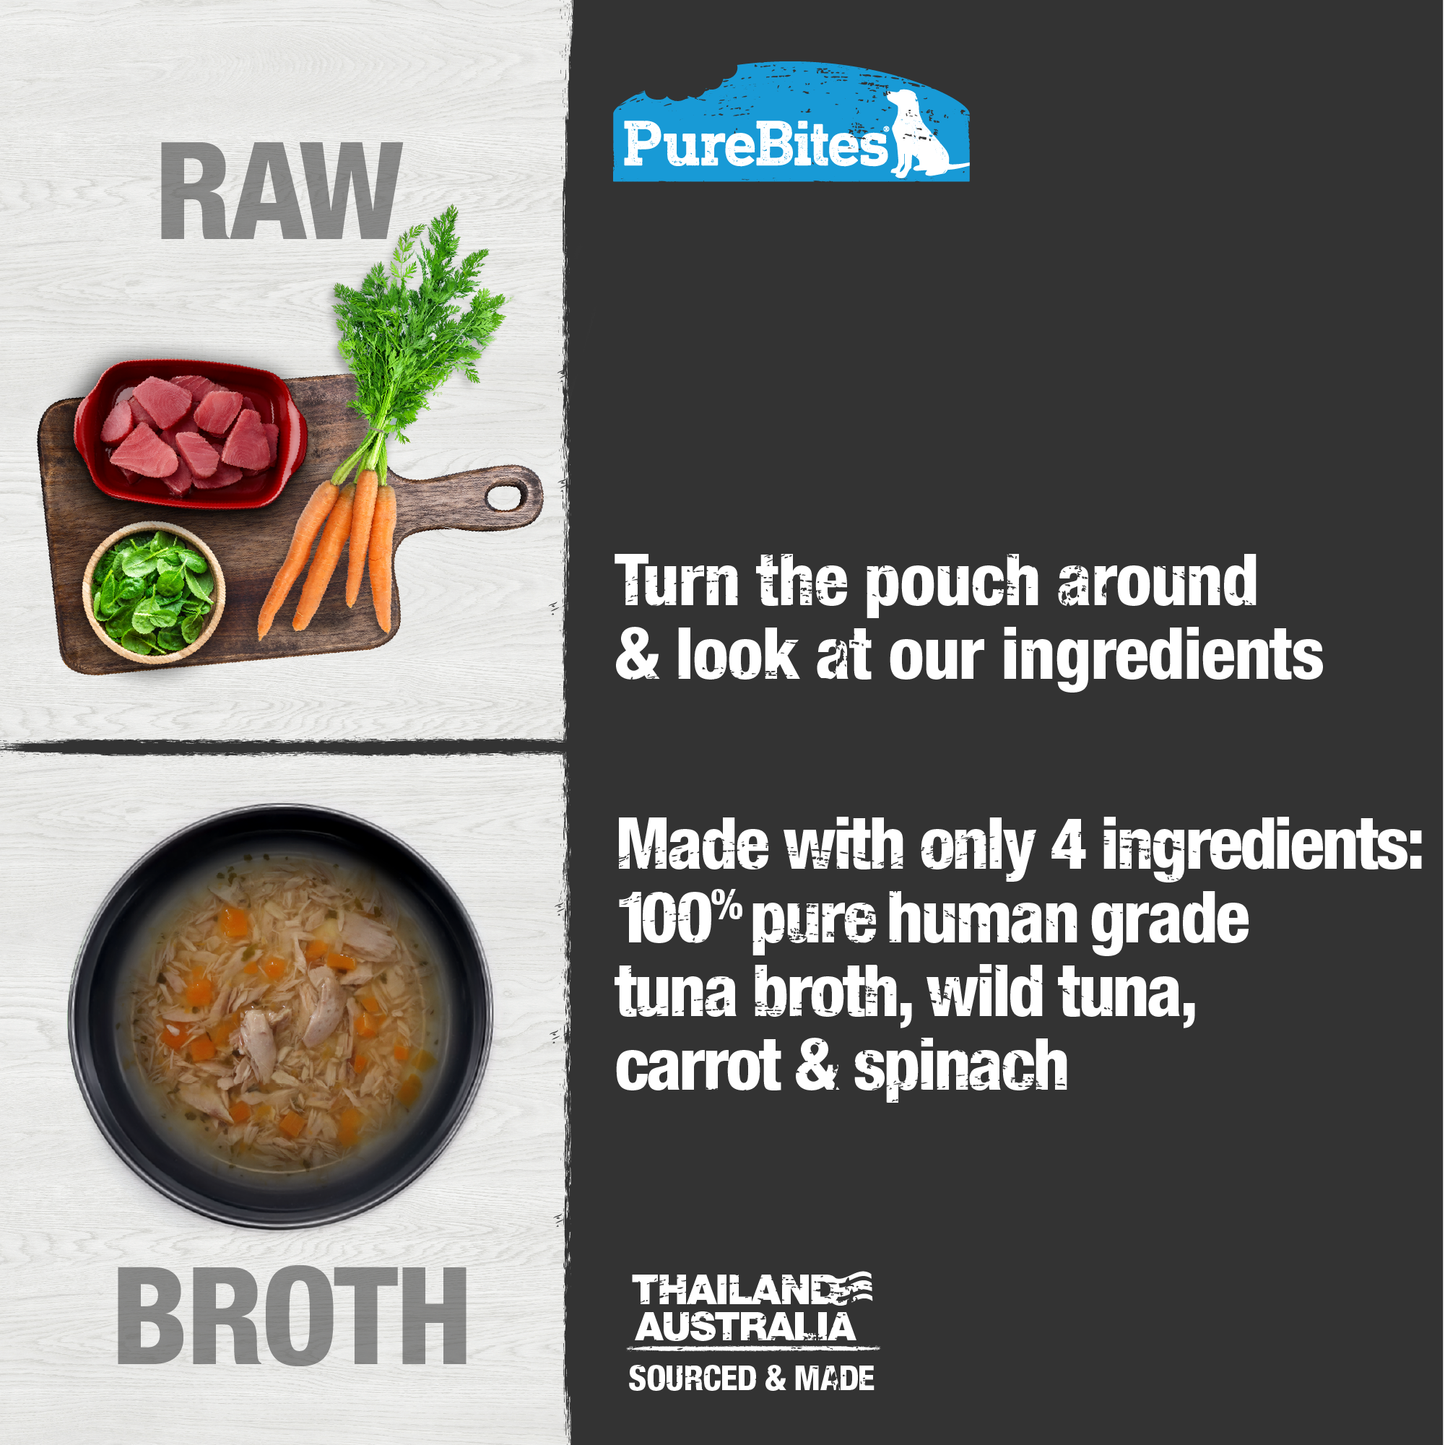 Made with only 4 Ingredients you can read, pronounce, and trust: Human grade tuna broth, tuna, carrot, spinach.